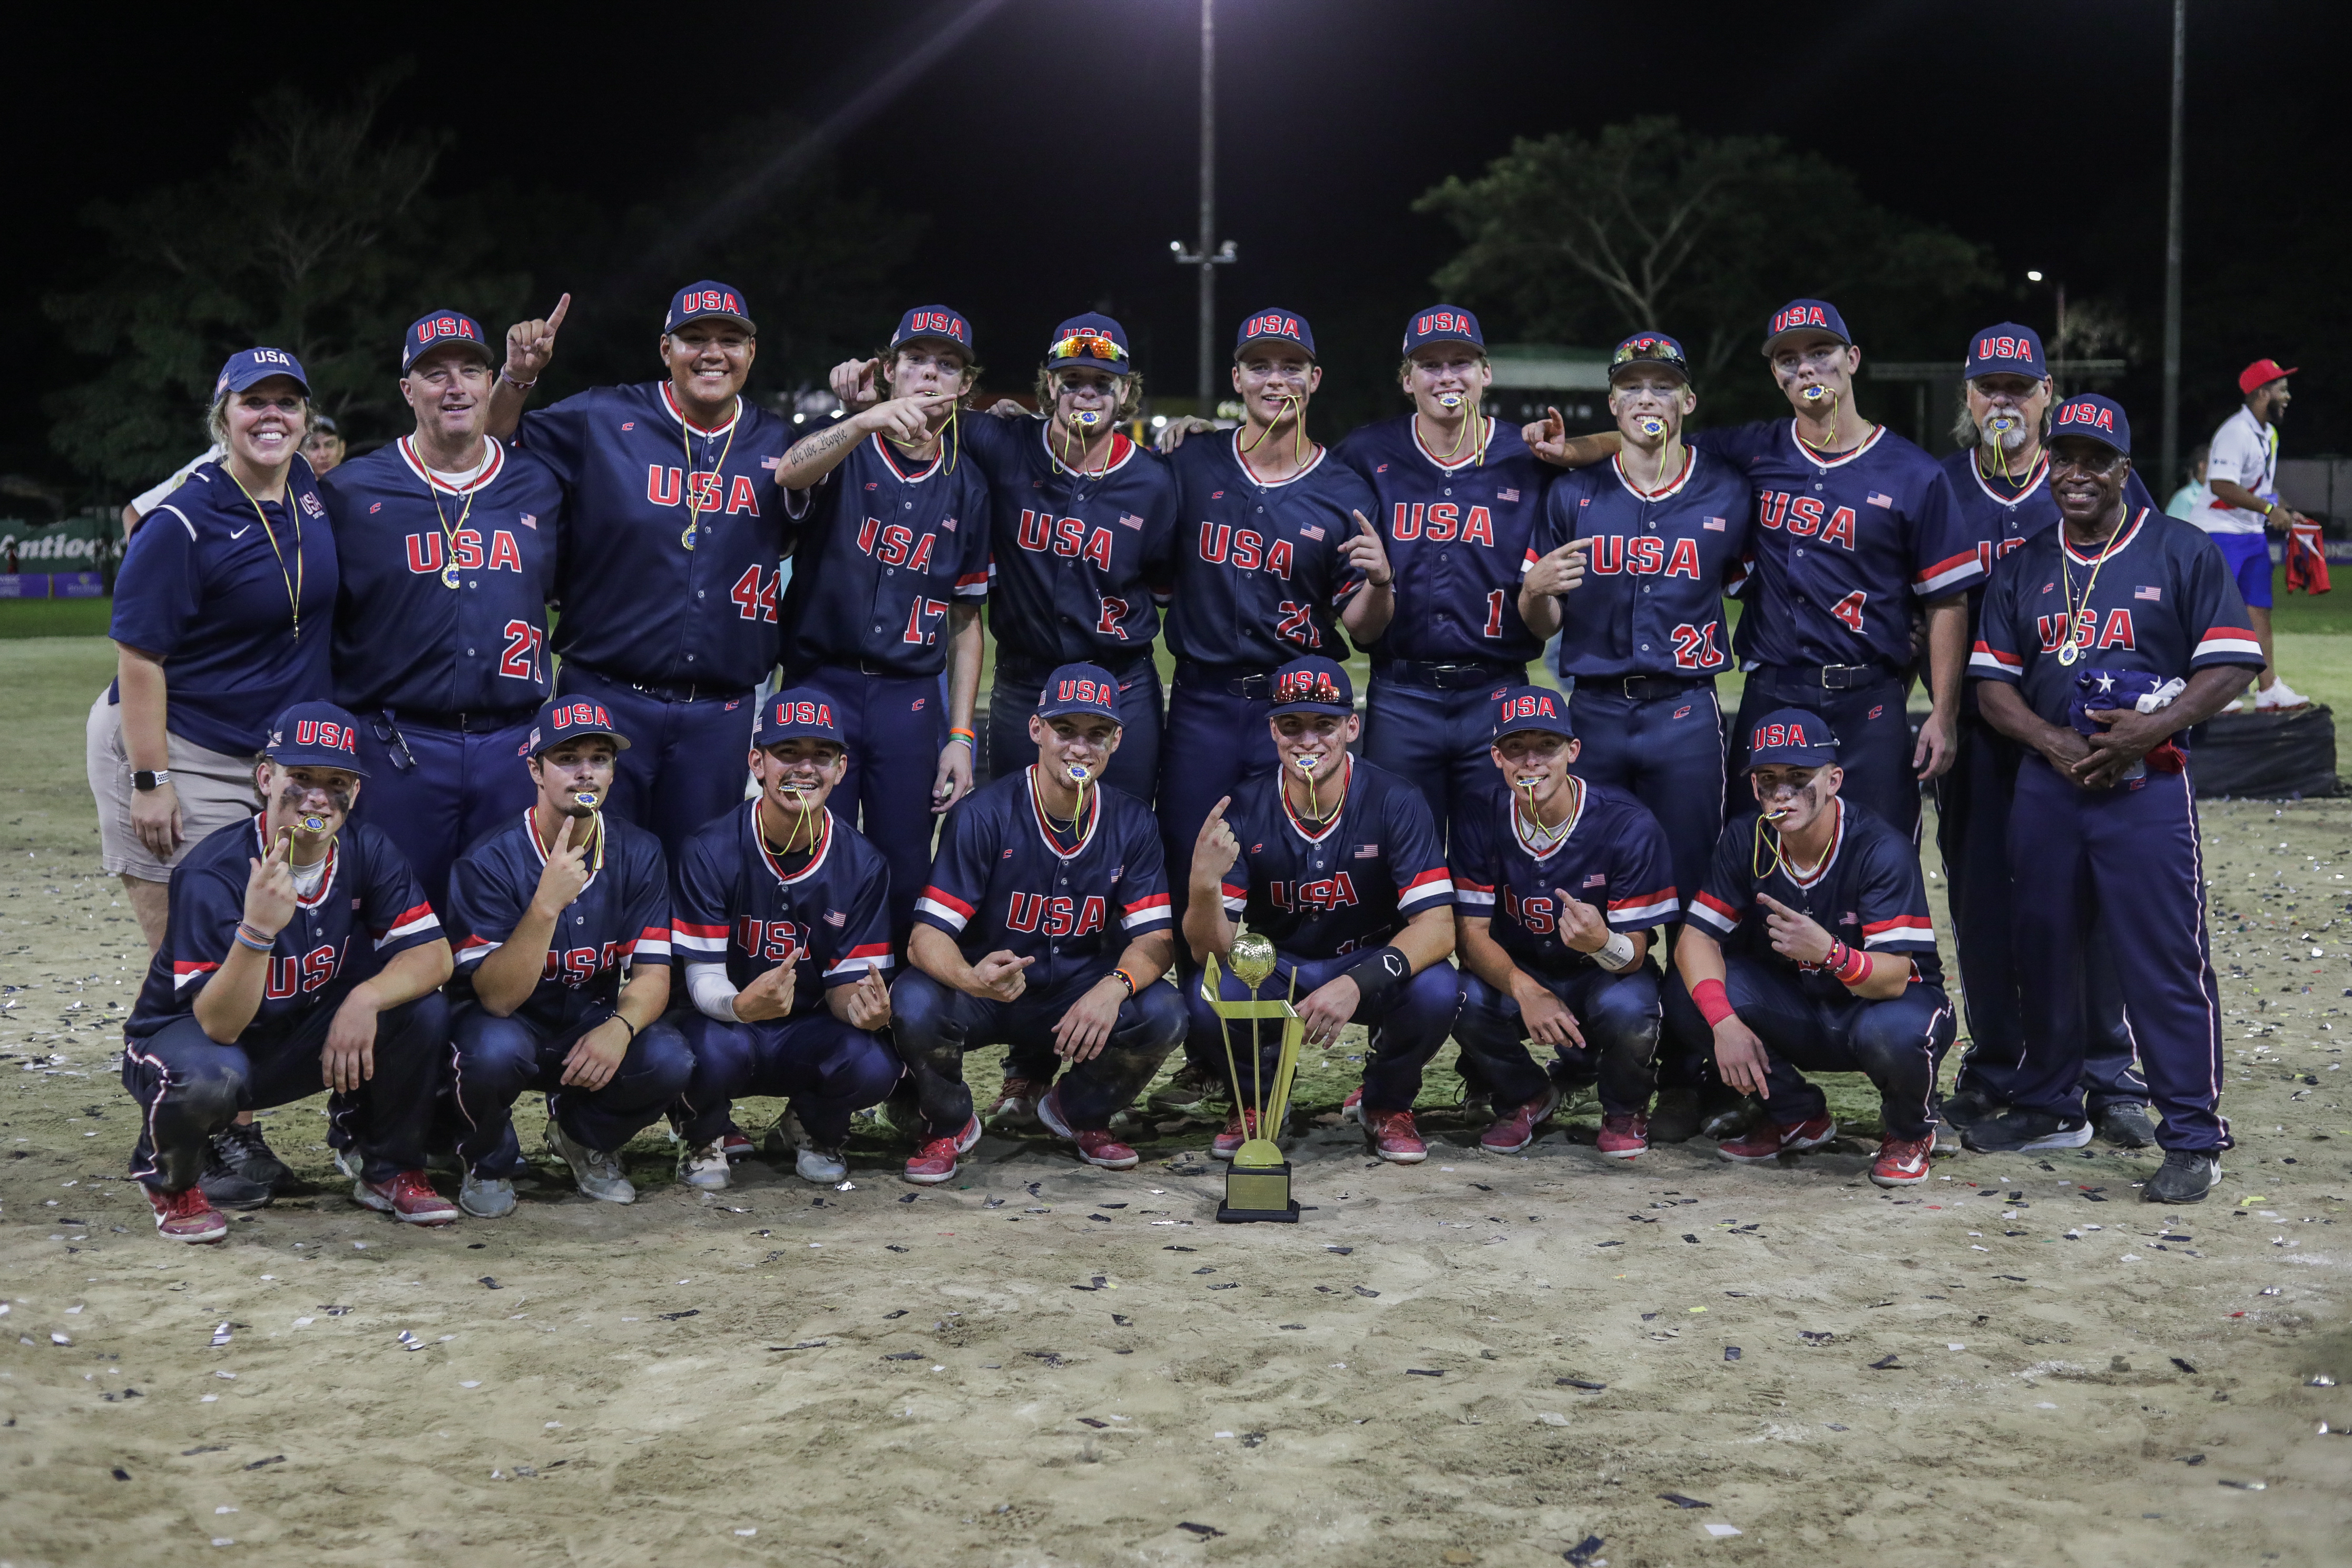 U-18 Men’s National Team clinches 2023 WBSC Pan American Championship gold medal with 6-1 victory over Venezuela, qualifies for WBSC World Cup held later this year featured image